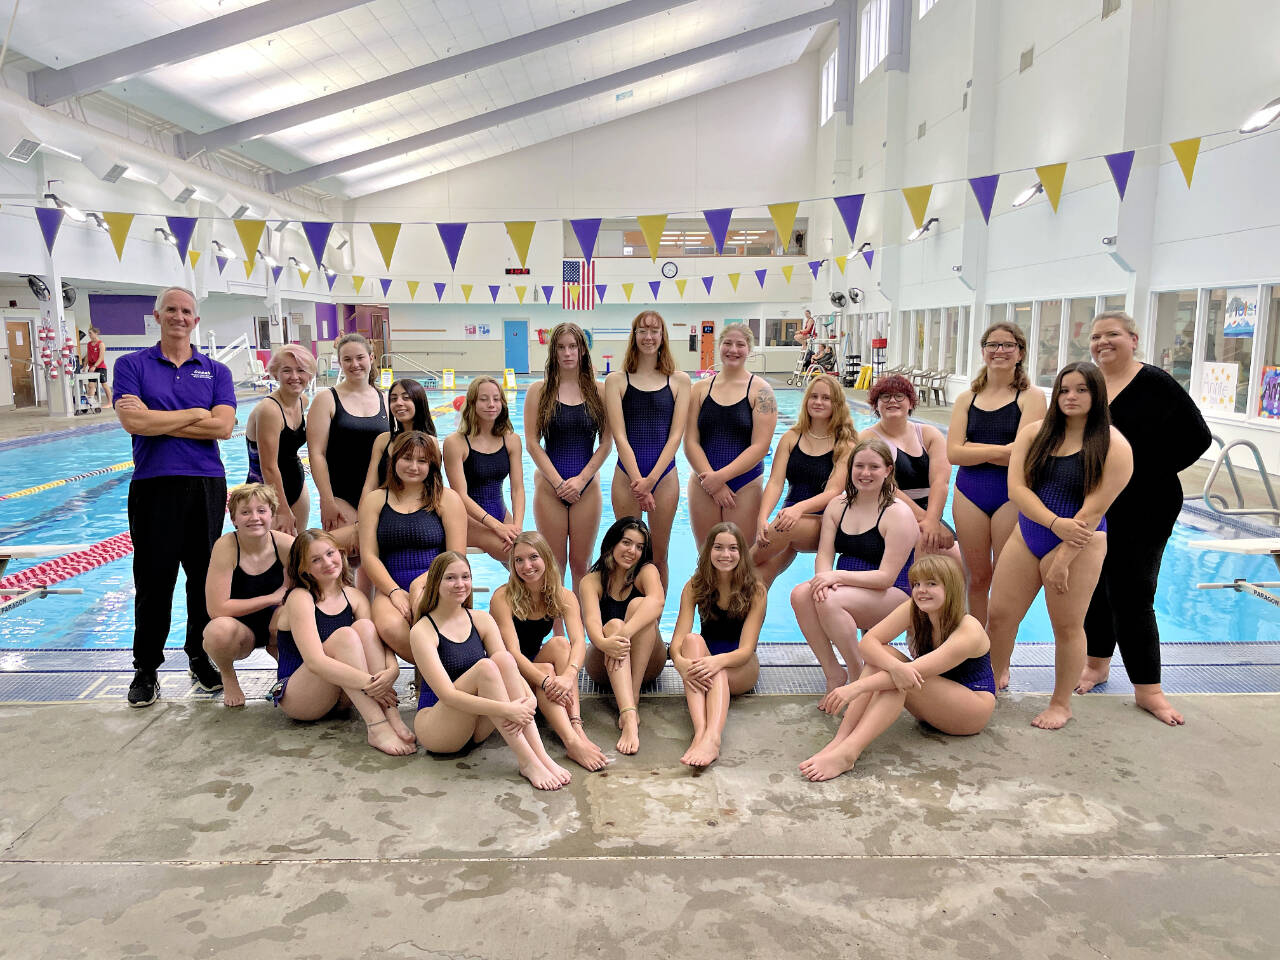 Photo by Wendy Morey
Sequim High School’s 2022 girls swimming squad capped their 2022 regular season in October. At least one relay is headed to the state meet set for next week in Federal Way.